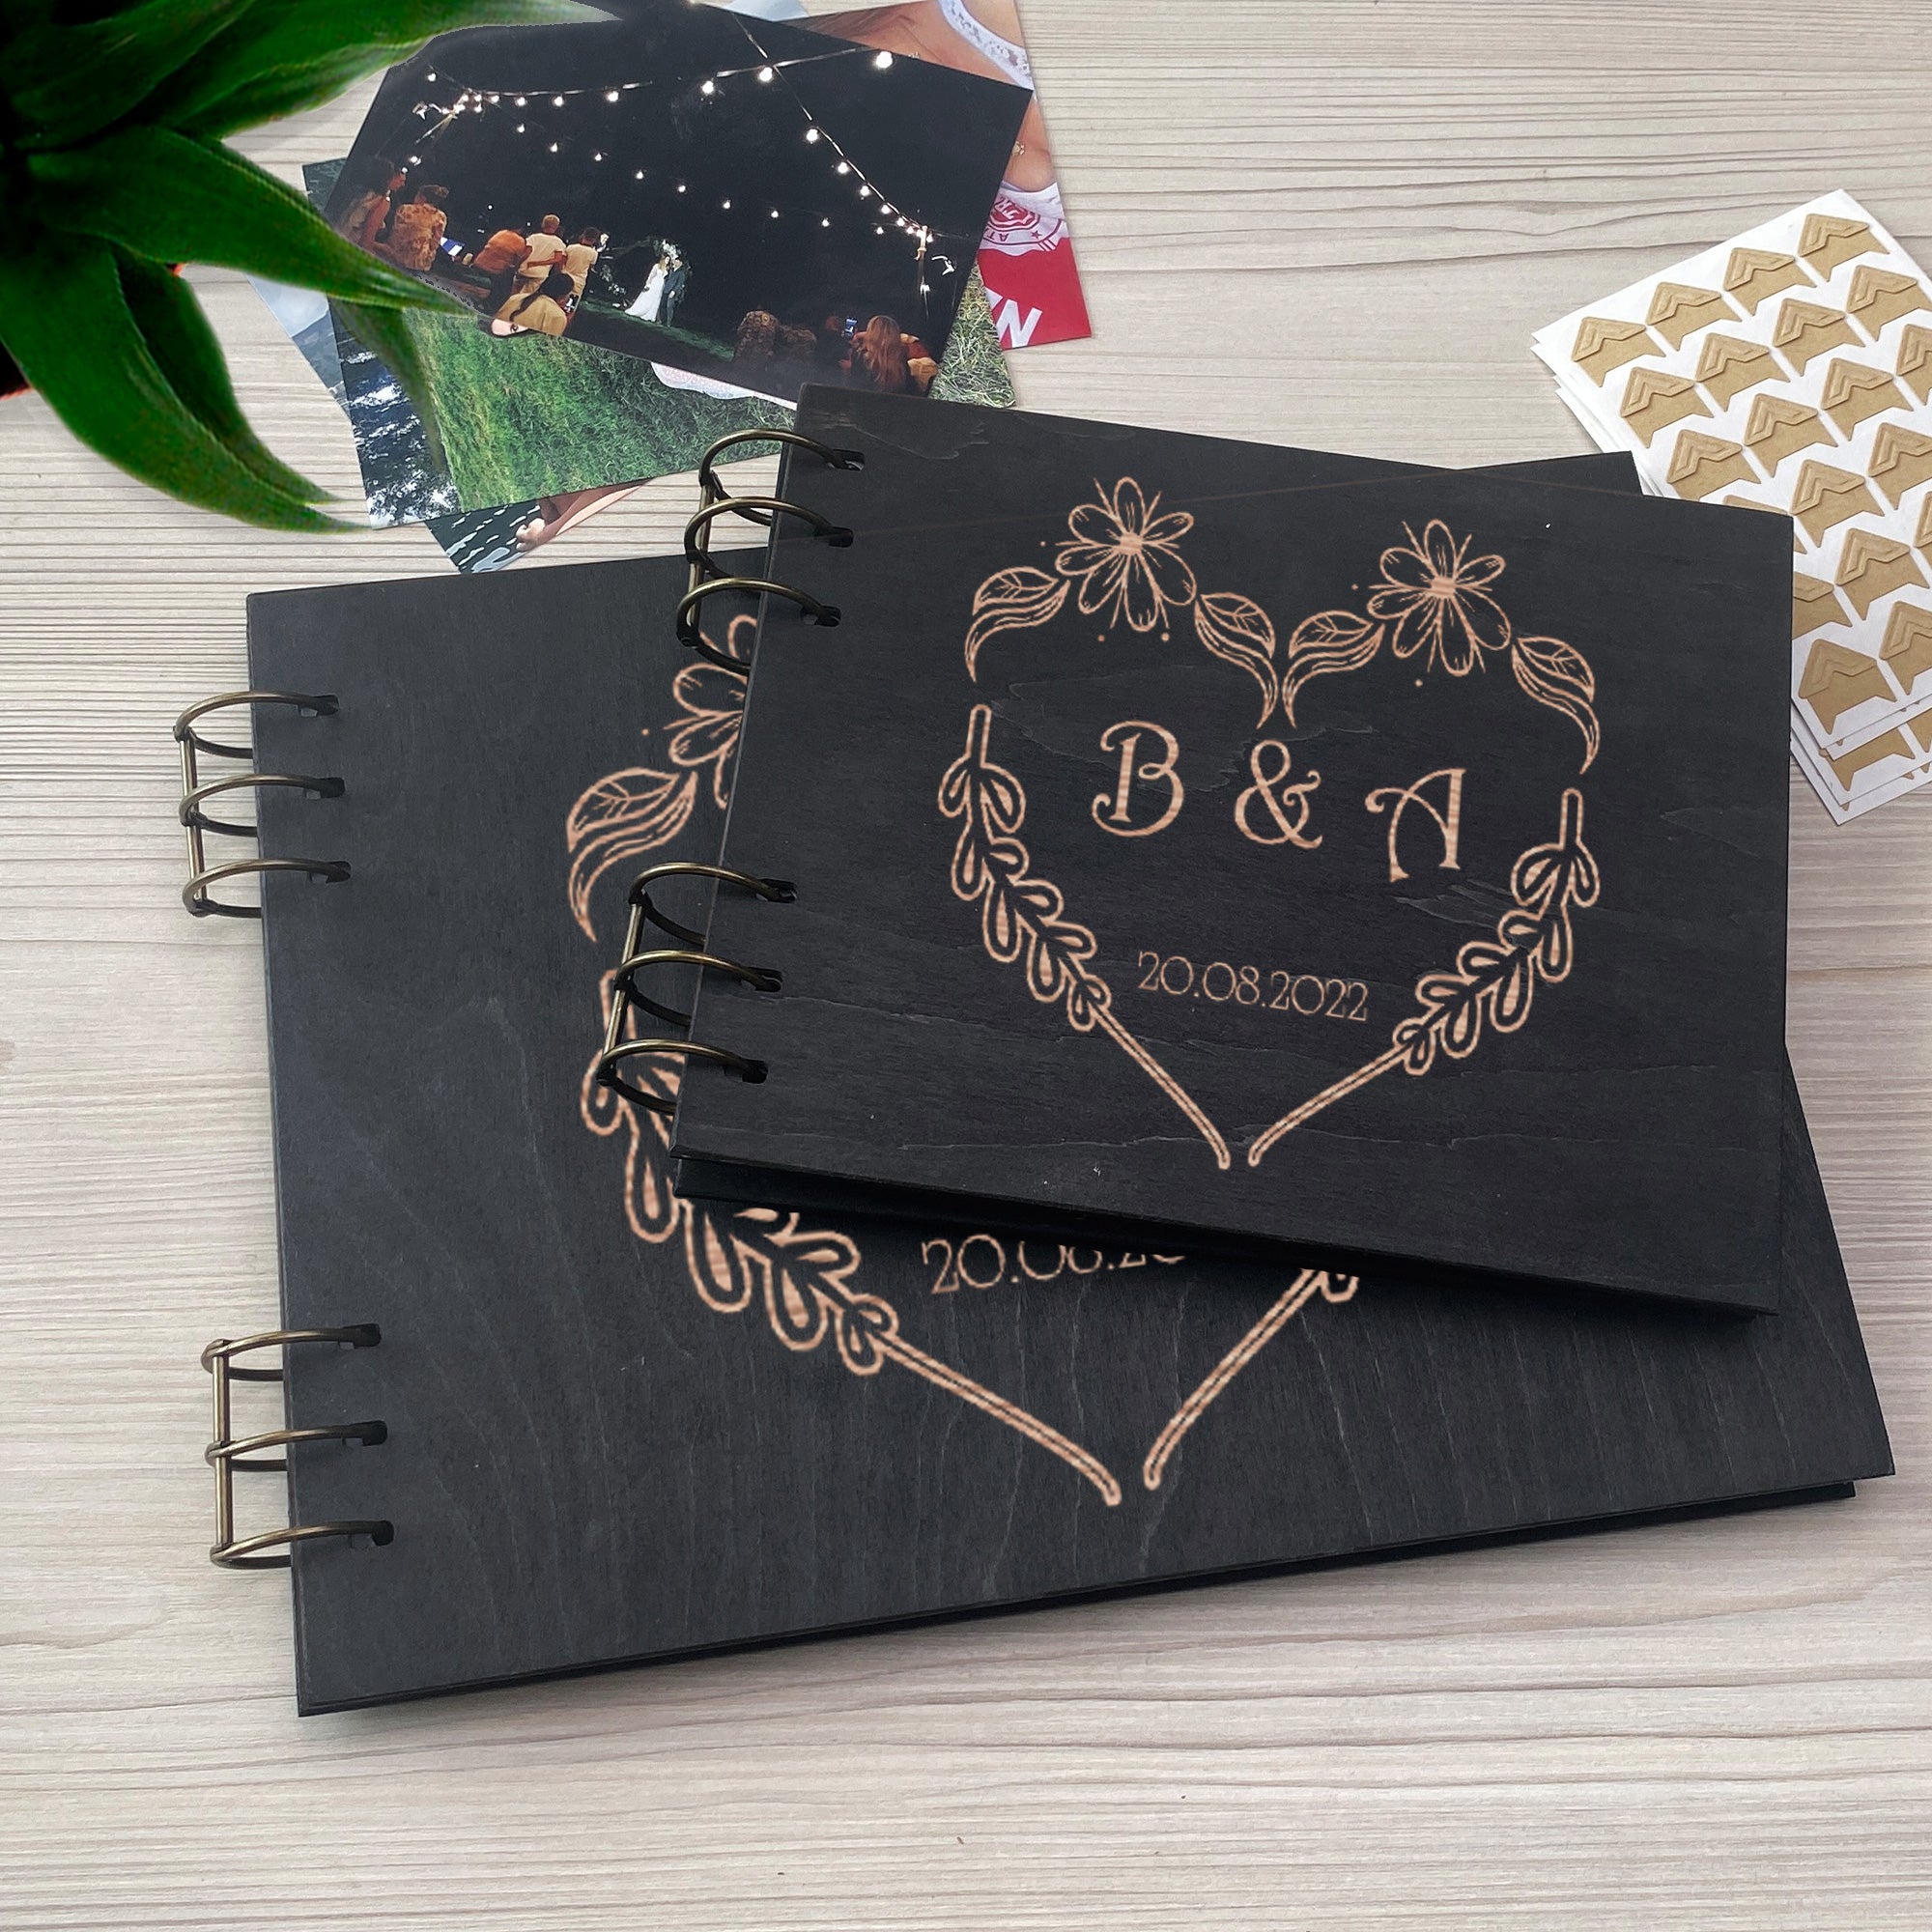 Personalized photo album cover and Wedding initials engraving